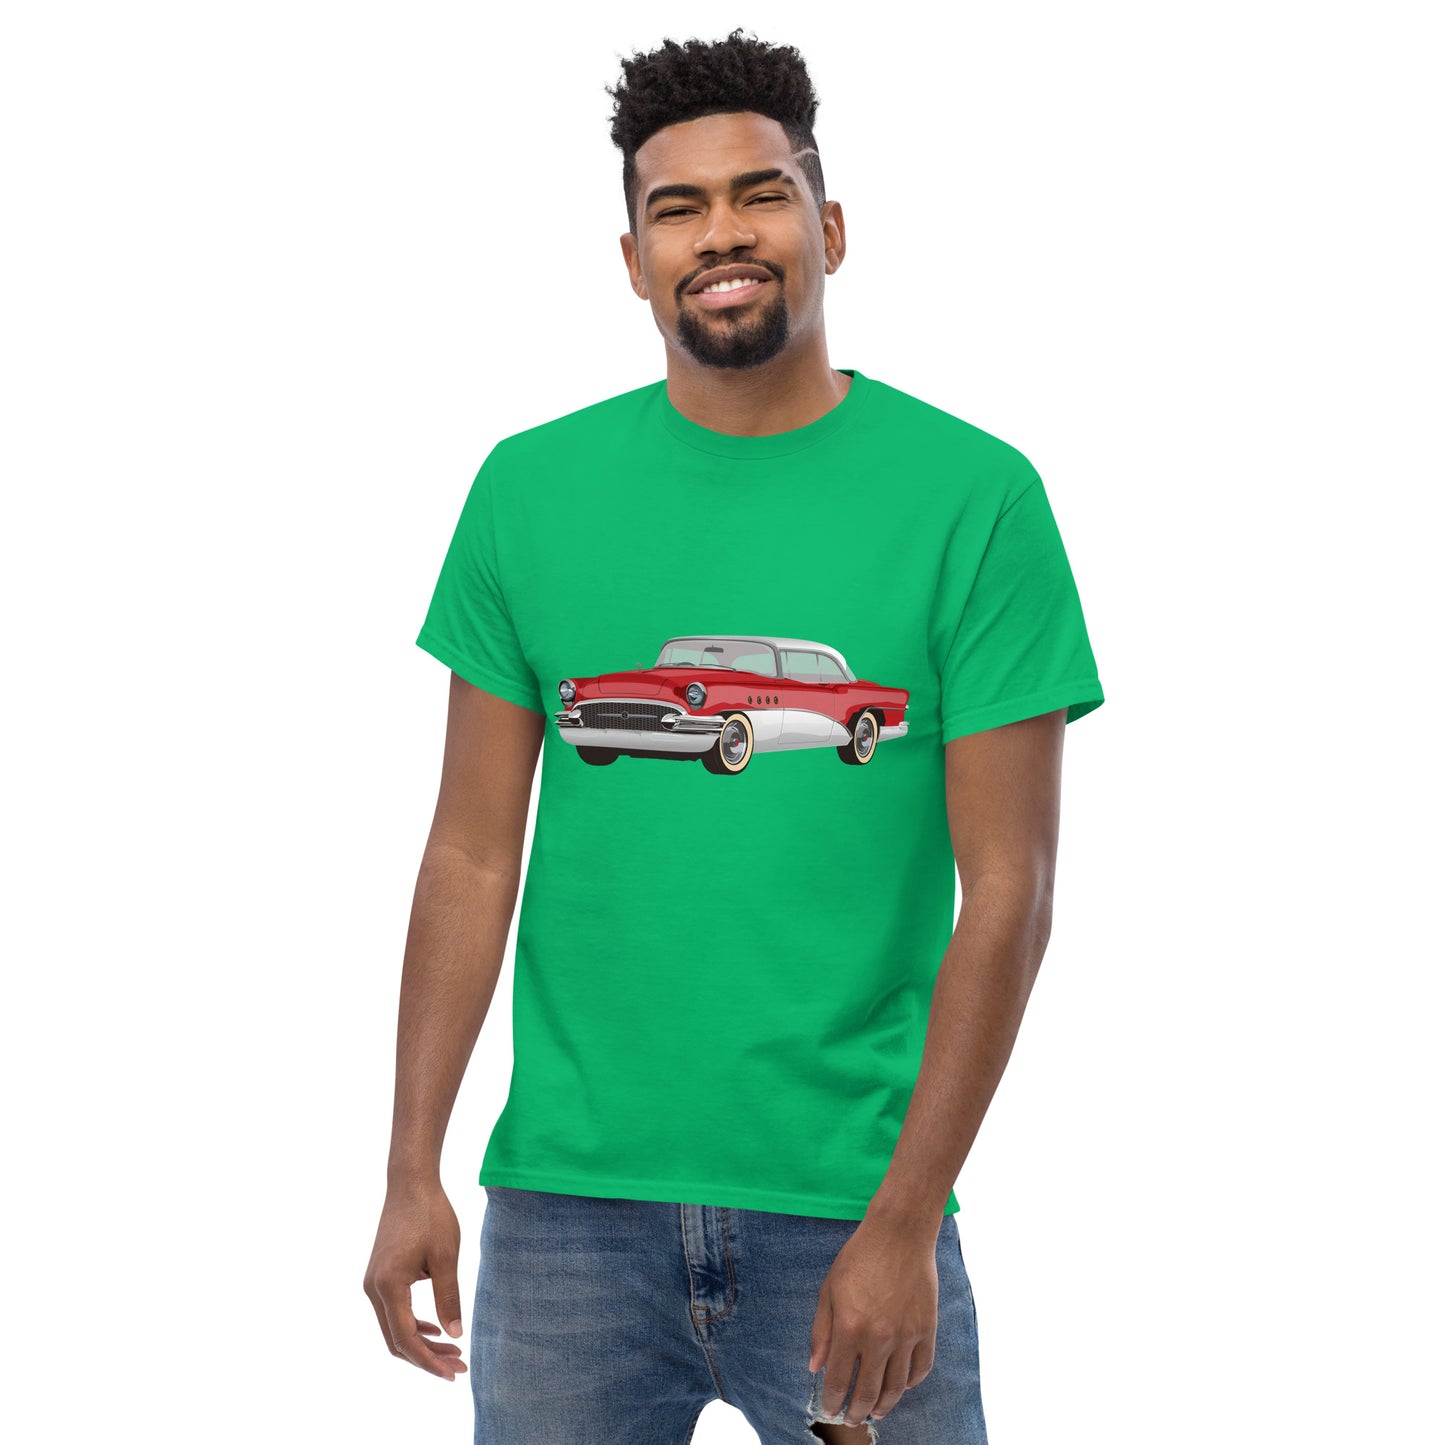 Men with Irish green t-shirt with red Chevrolet 